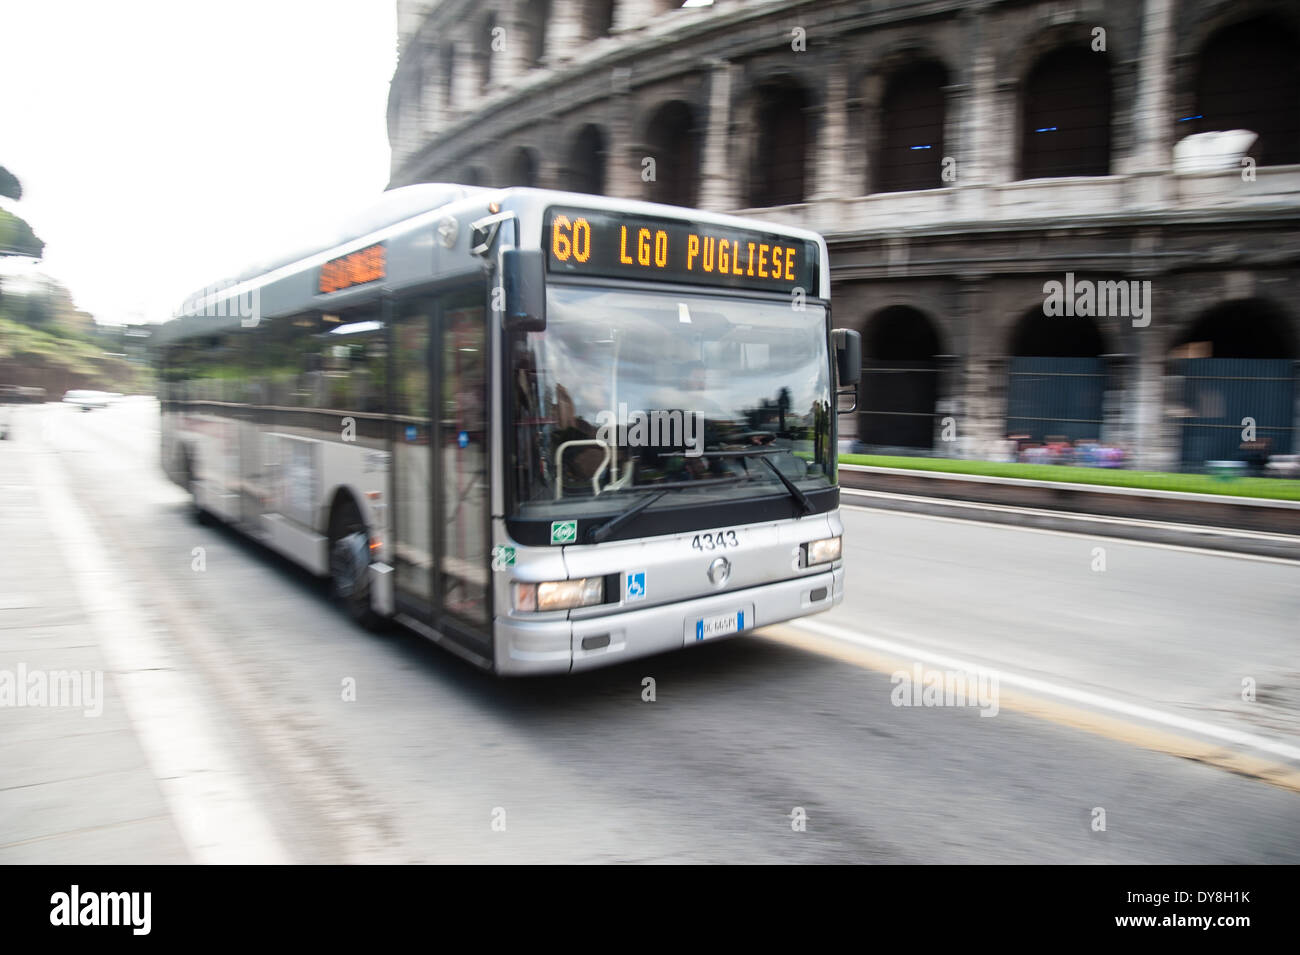 Bus passing the Coliseum. Slow shutter speed giving the impression of speed Stock Photo